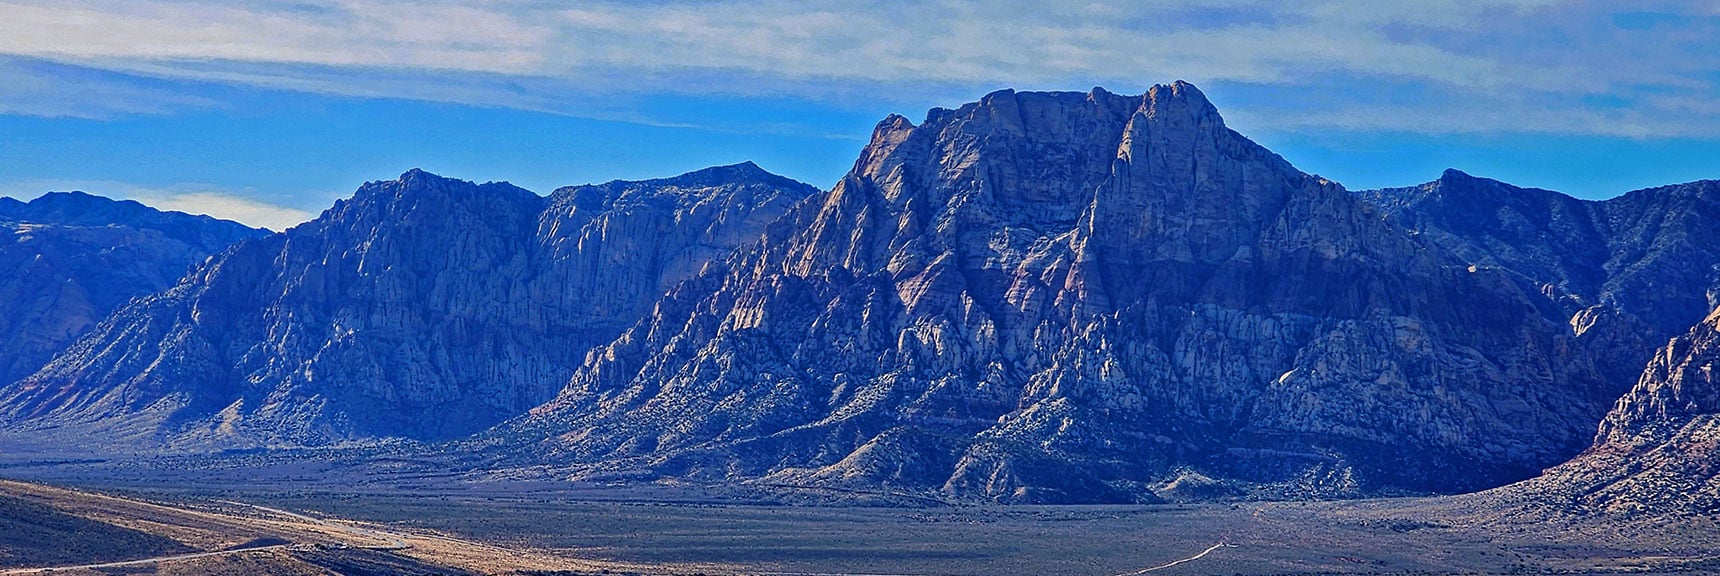 Mt. Wilson, Tallest of Rainbow Mountains at 7,071ft. Oak Creek Canyon (left); First Creek Canyon (right) | Grand Staircase | Calico Basin, Nevada